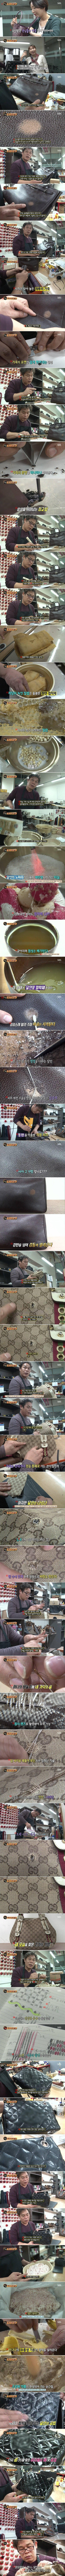 The master of bag repair who starred in "Master of Life"